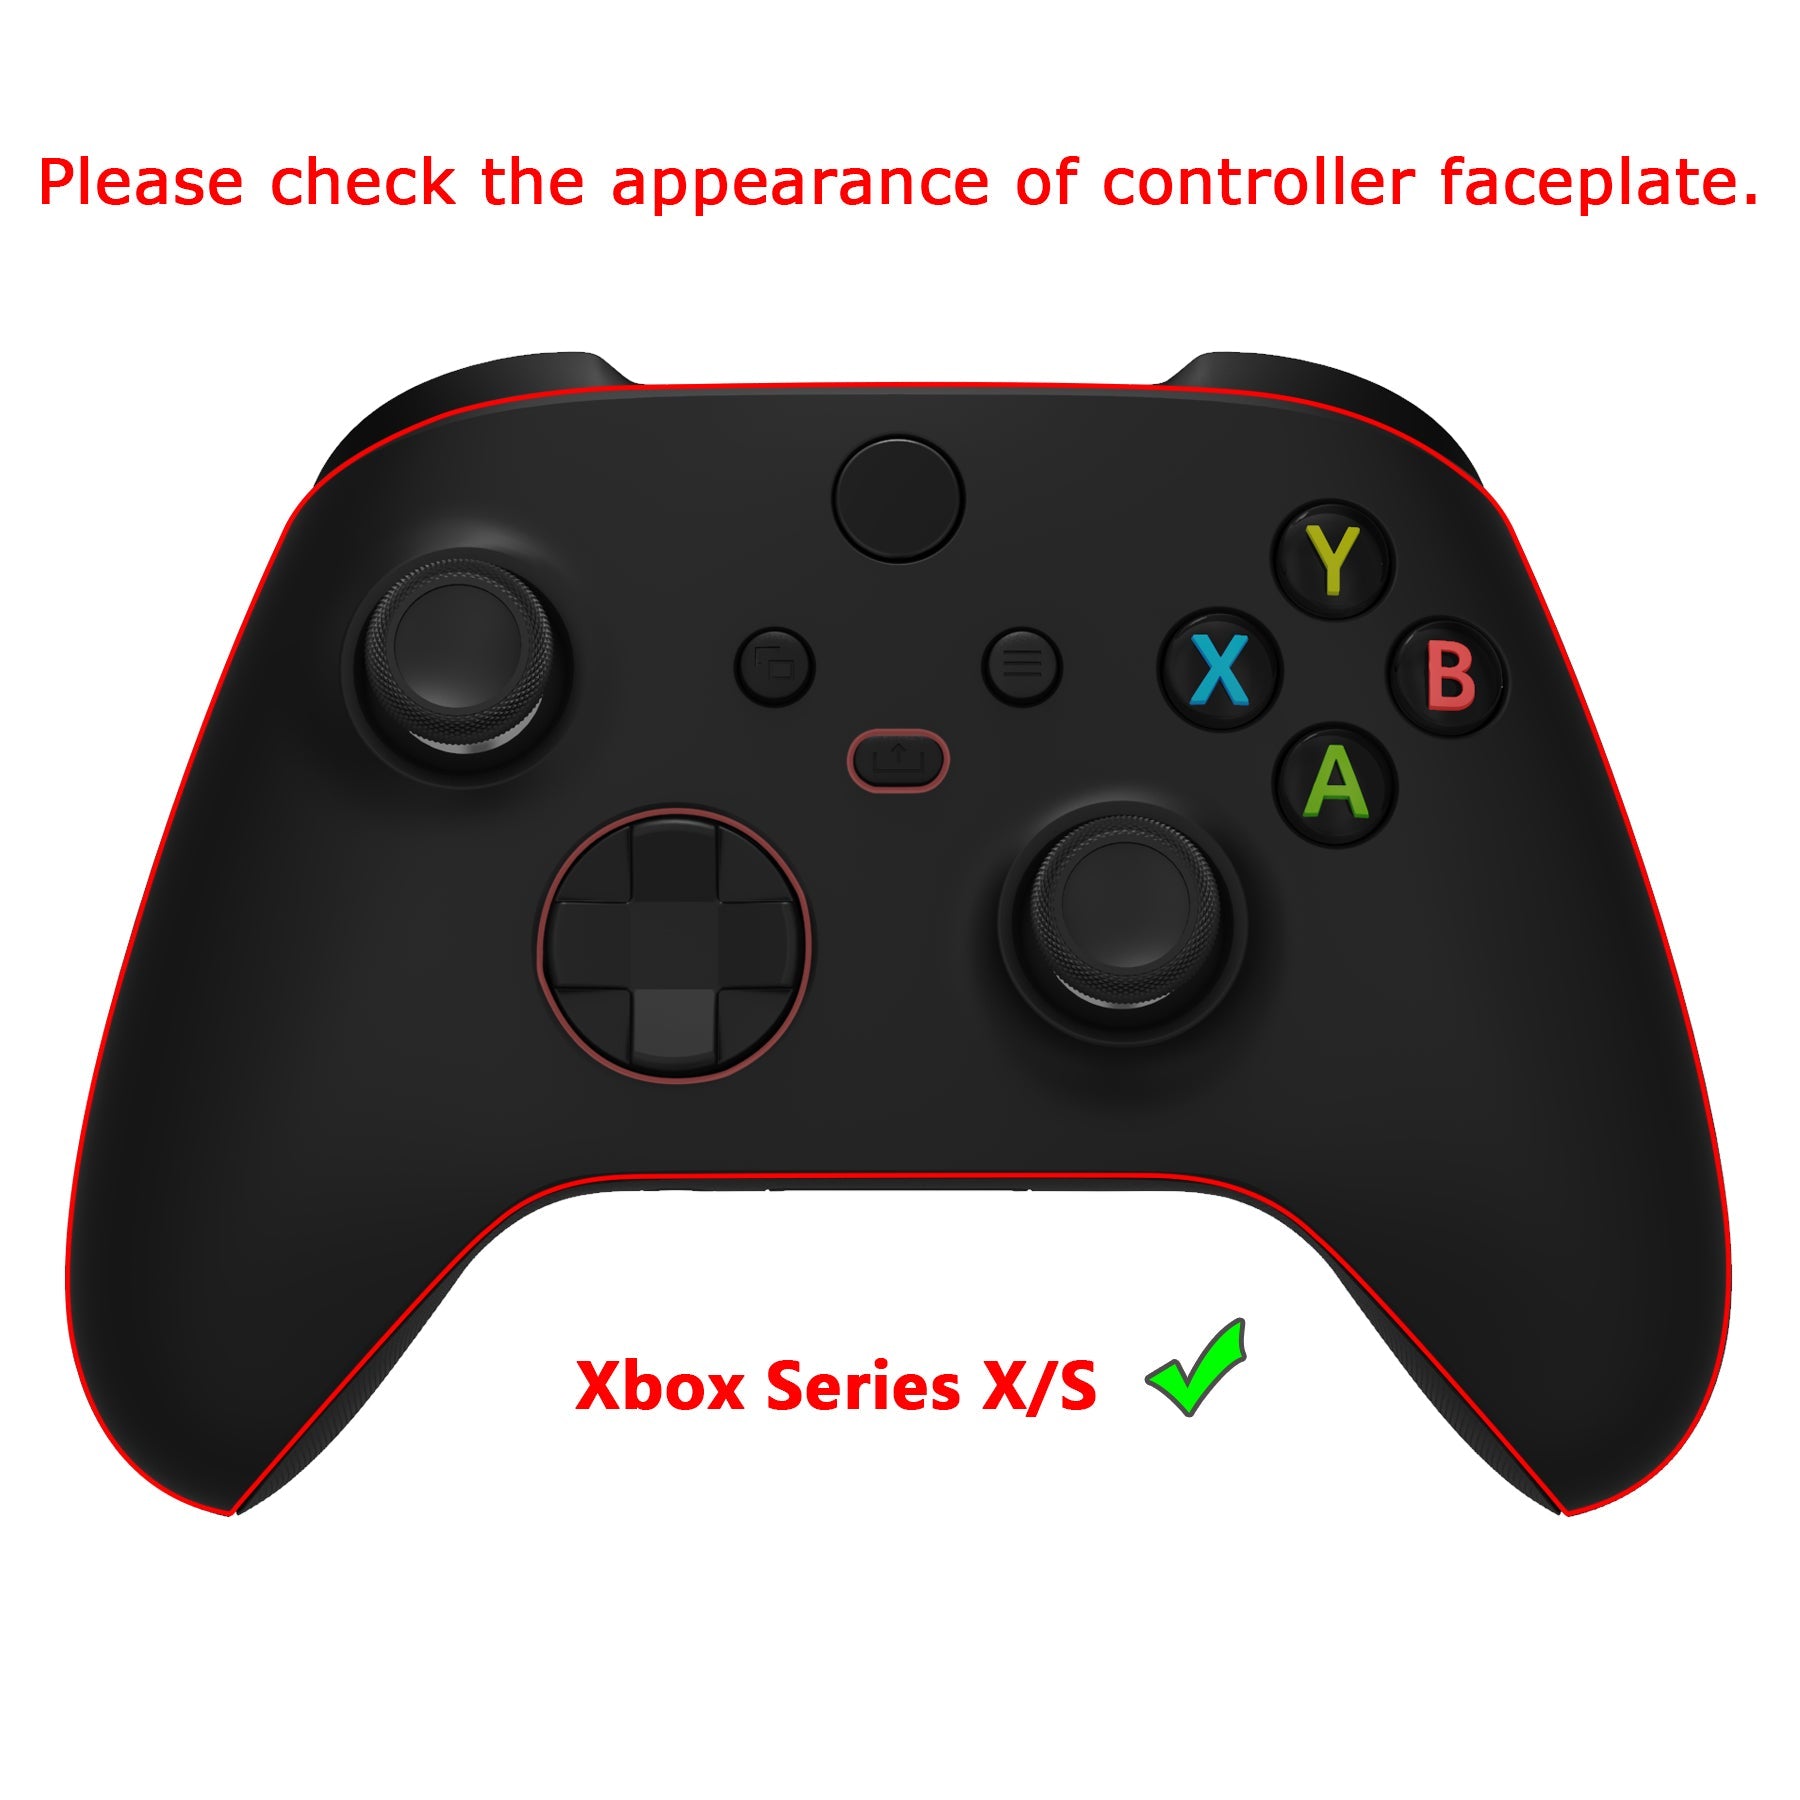 eXtremeRate Retail Green Soft Touch Grip Back Panels, Comfortable Non-Slip Side Rails Handles, Game Improvement Replacement Parts for Xbox Series S / X Controller - Controller NOT Included - PX3P306